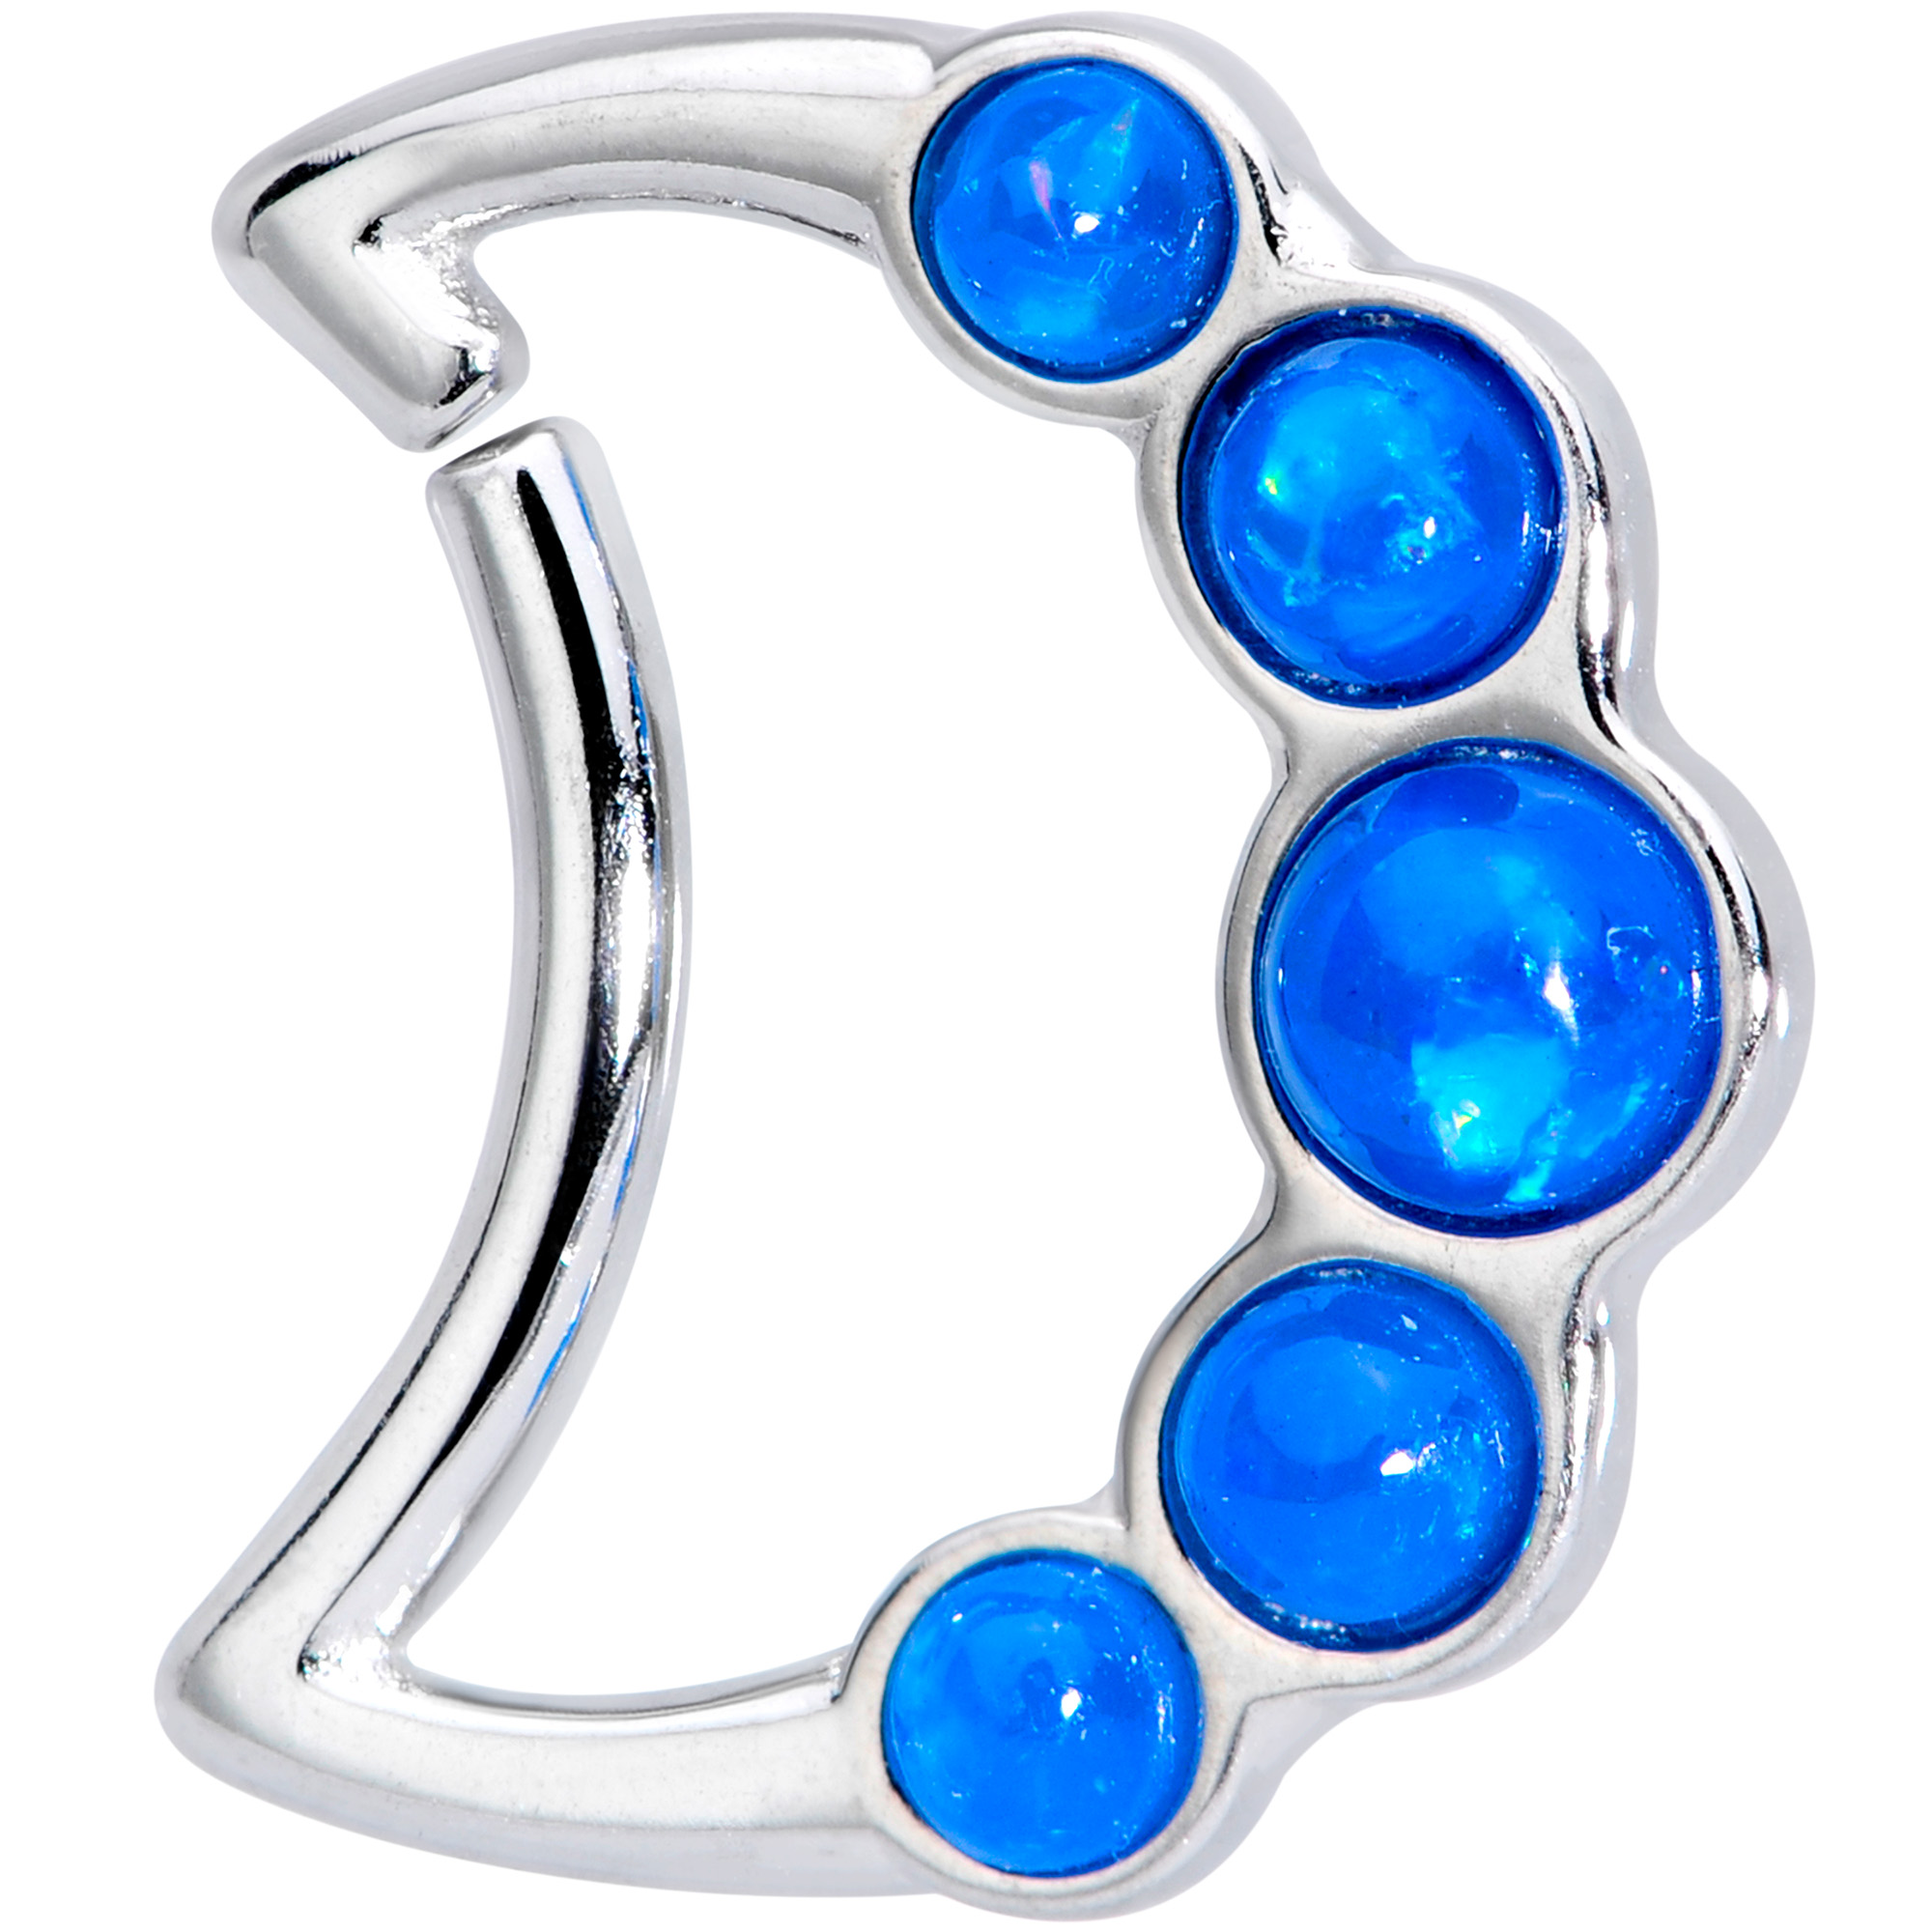 Body Candy Womens 16G 316L Stainless Steel Blue Orb Moon Left Ear Closure Ring Daith Helix Tragus Rook 3/8" - image 1 of 1